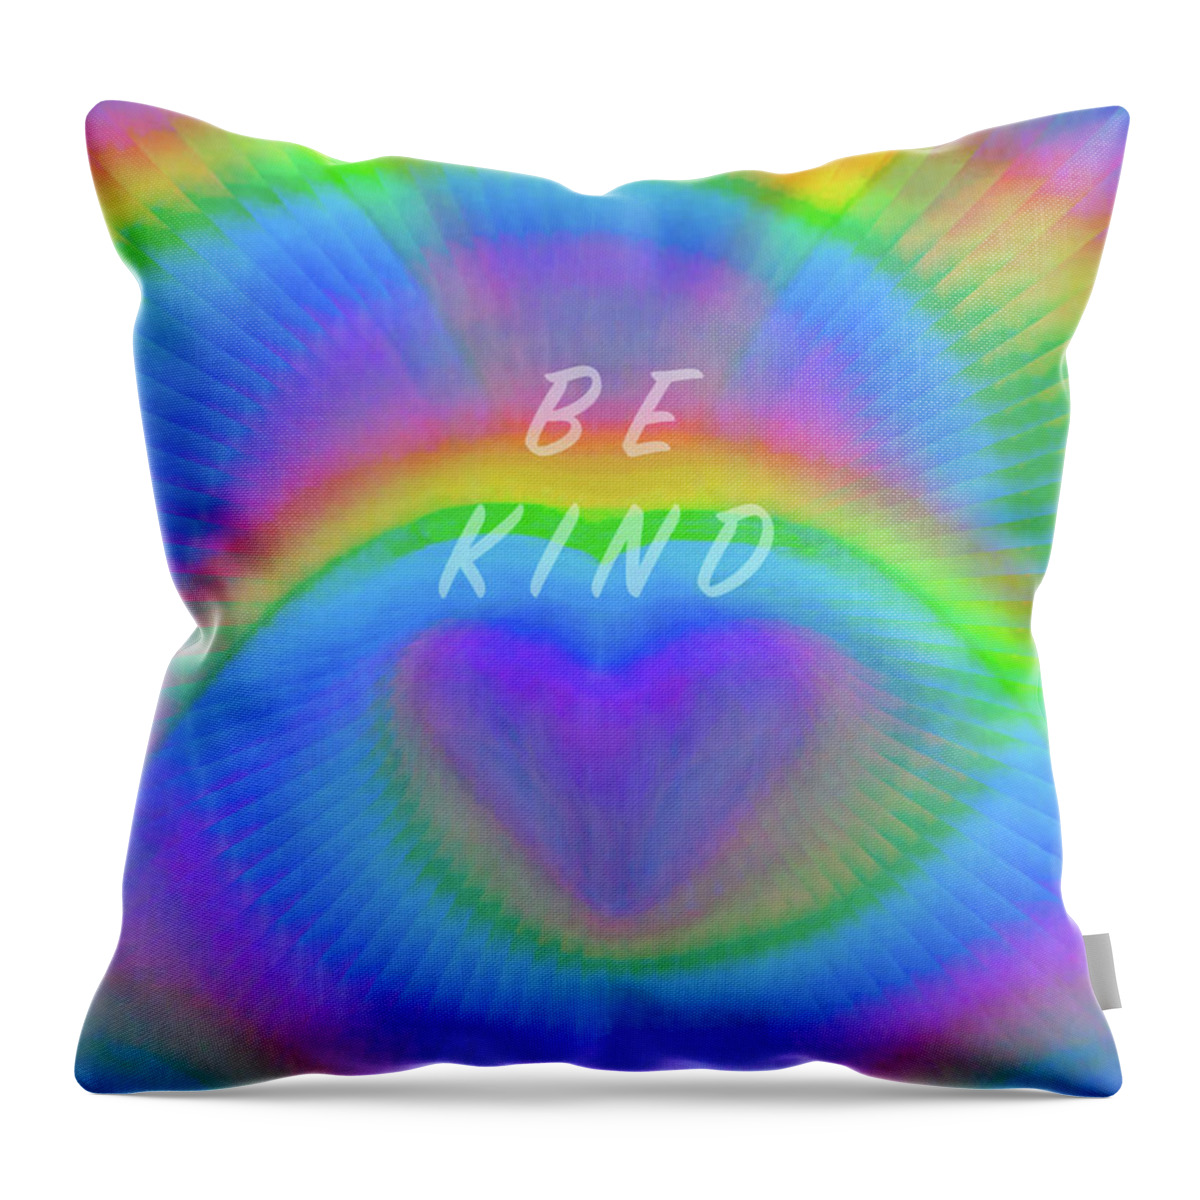 #bekind #bekindtooneanother #ellendegeneres #theellenshow #heart #love #customfacemask #facemask #mask #clothfacemask #facecovering #facemasksforsale #maskforsale #fashionablemask #covidmask #facecover #washablemask #rainbow #rainbowmask #rainbowfacemask #whenitrainslookforrainbows #bearainbowinthestorm #colorful #art #stayathome #nurse #nursegift #doctor #doctorgift #healthcareworkergift #gift #ppe #covid19 #coronavirus #lgbtq #pride #gaypride #togetheralone #nystrong #nytough Throw Pillow featuring the digital art Rainbow Love - Be Kind Face Mask by Artistic Mystic